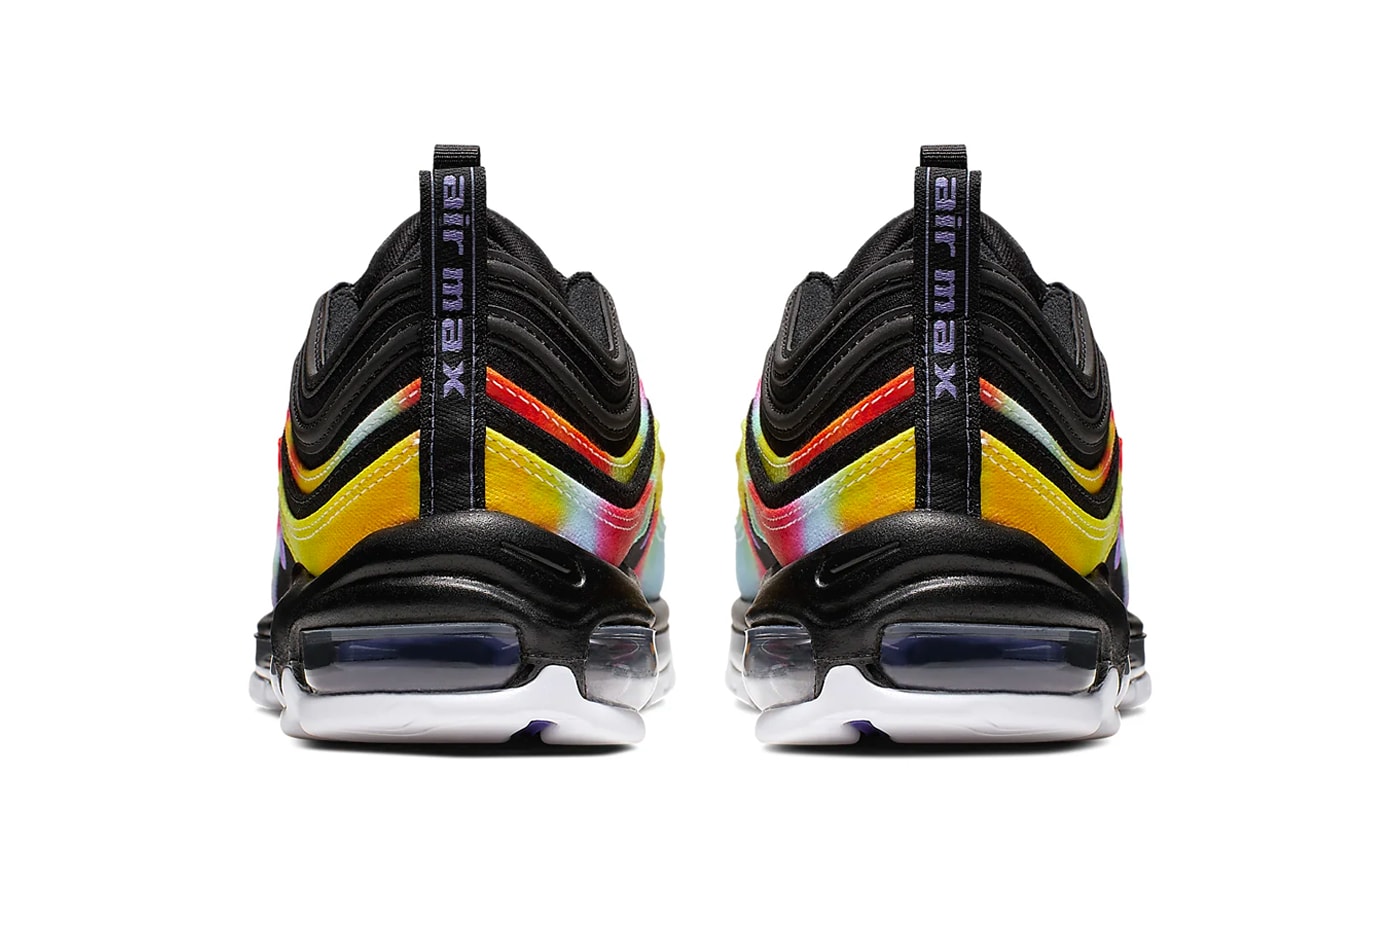 Nike Air Max 97 Black Psychic Purple White Multi Color air sole unit midsole bubbles runner trainers lifestyle sneaker footwear 3m reflective